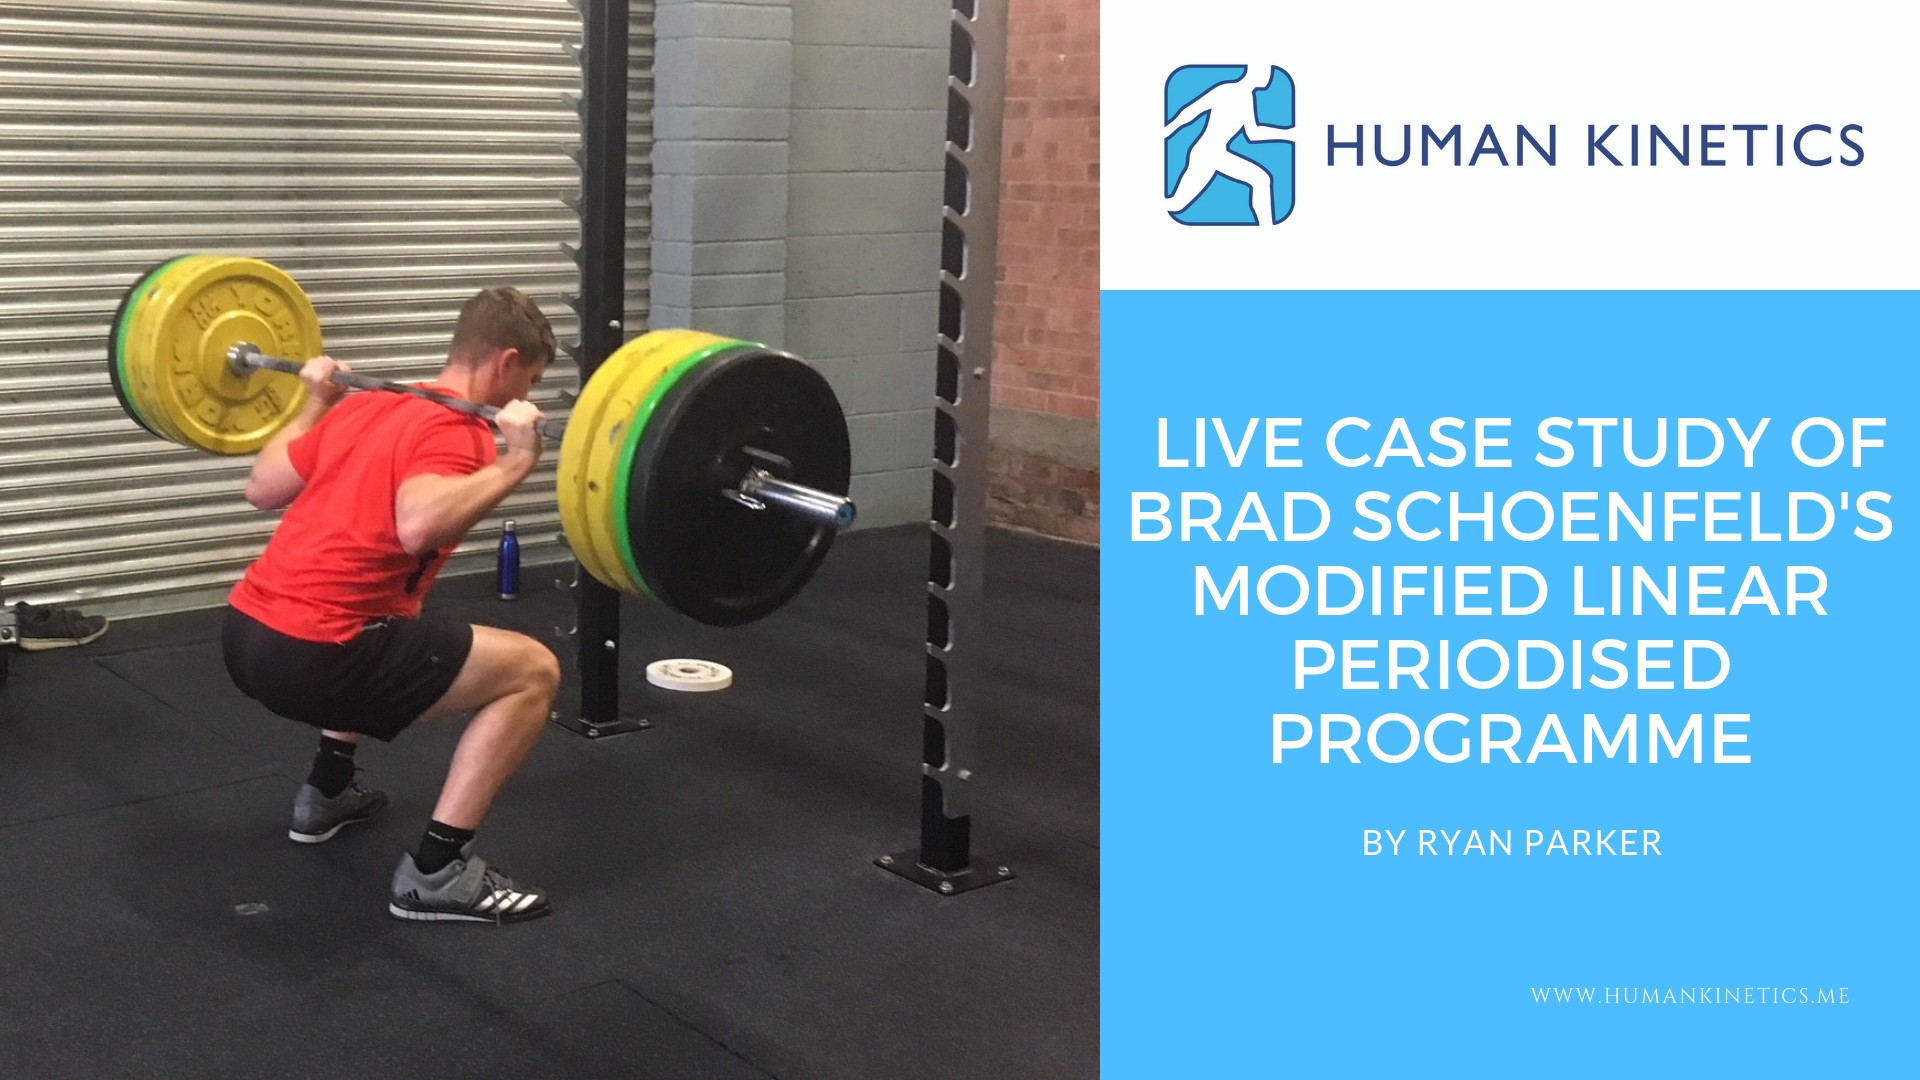 Live case study of Brad Schoenfeld's Modified Linear Periodised Programme for Loading - Ryan Parker